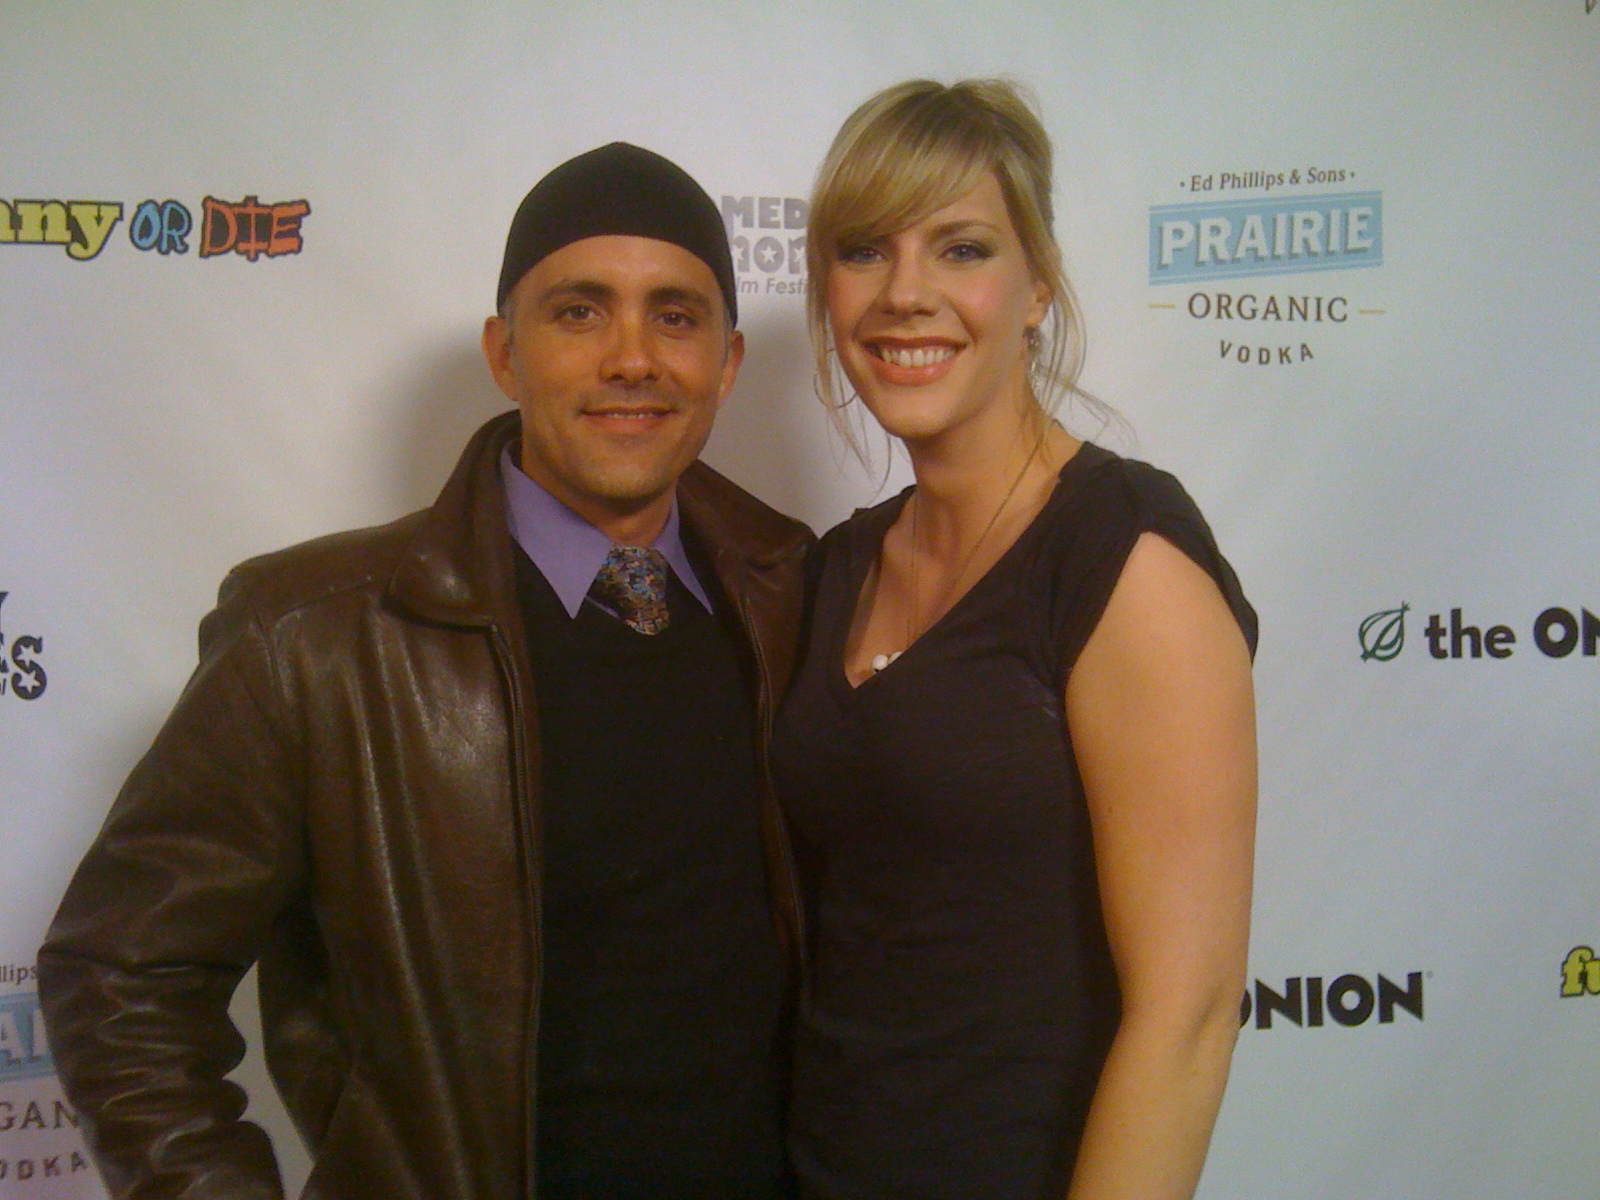 Simon Anthony and Jenny Flack at a Los Angeles Film Festival for After Dinner.